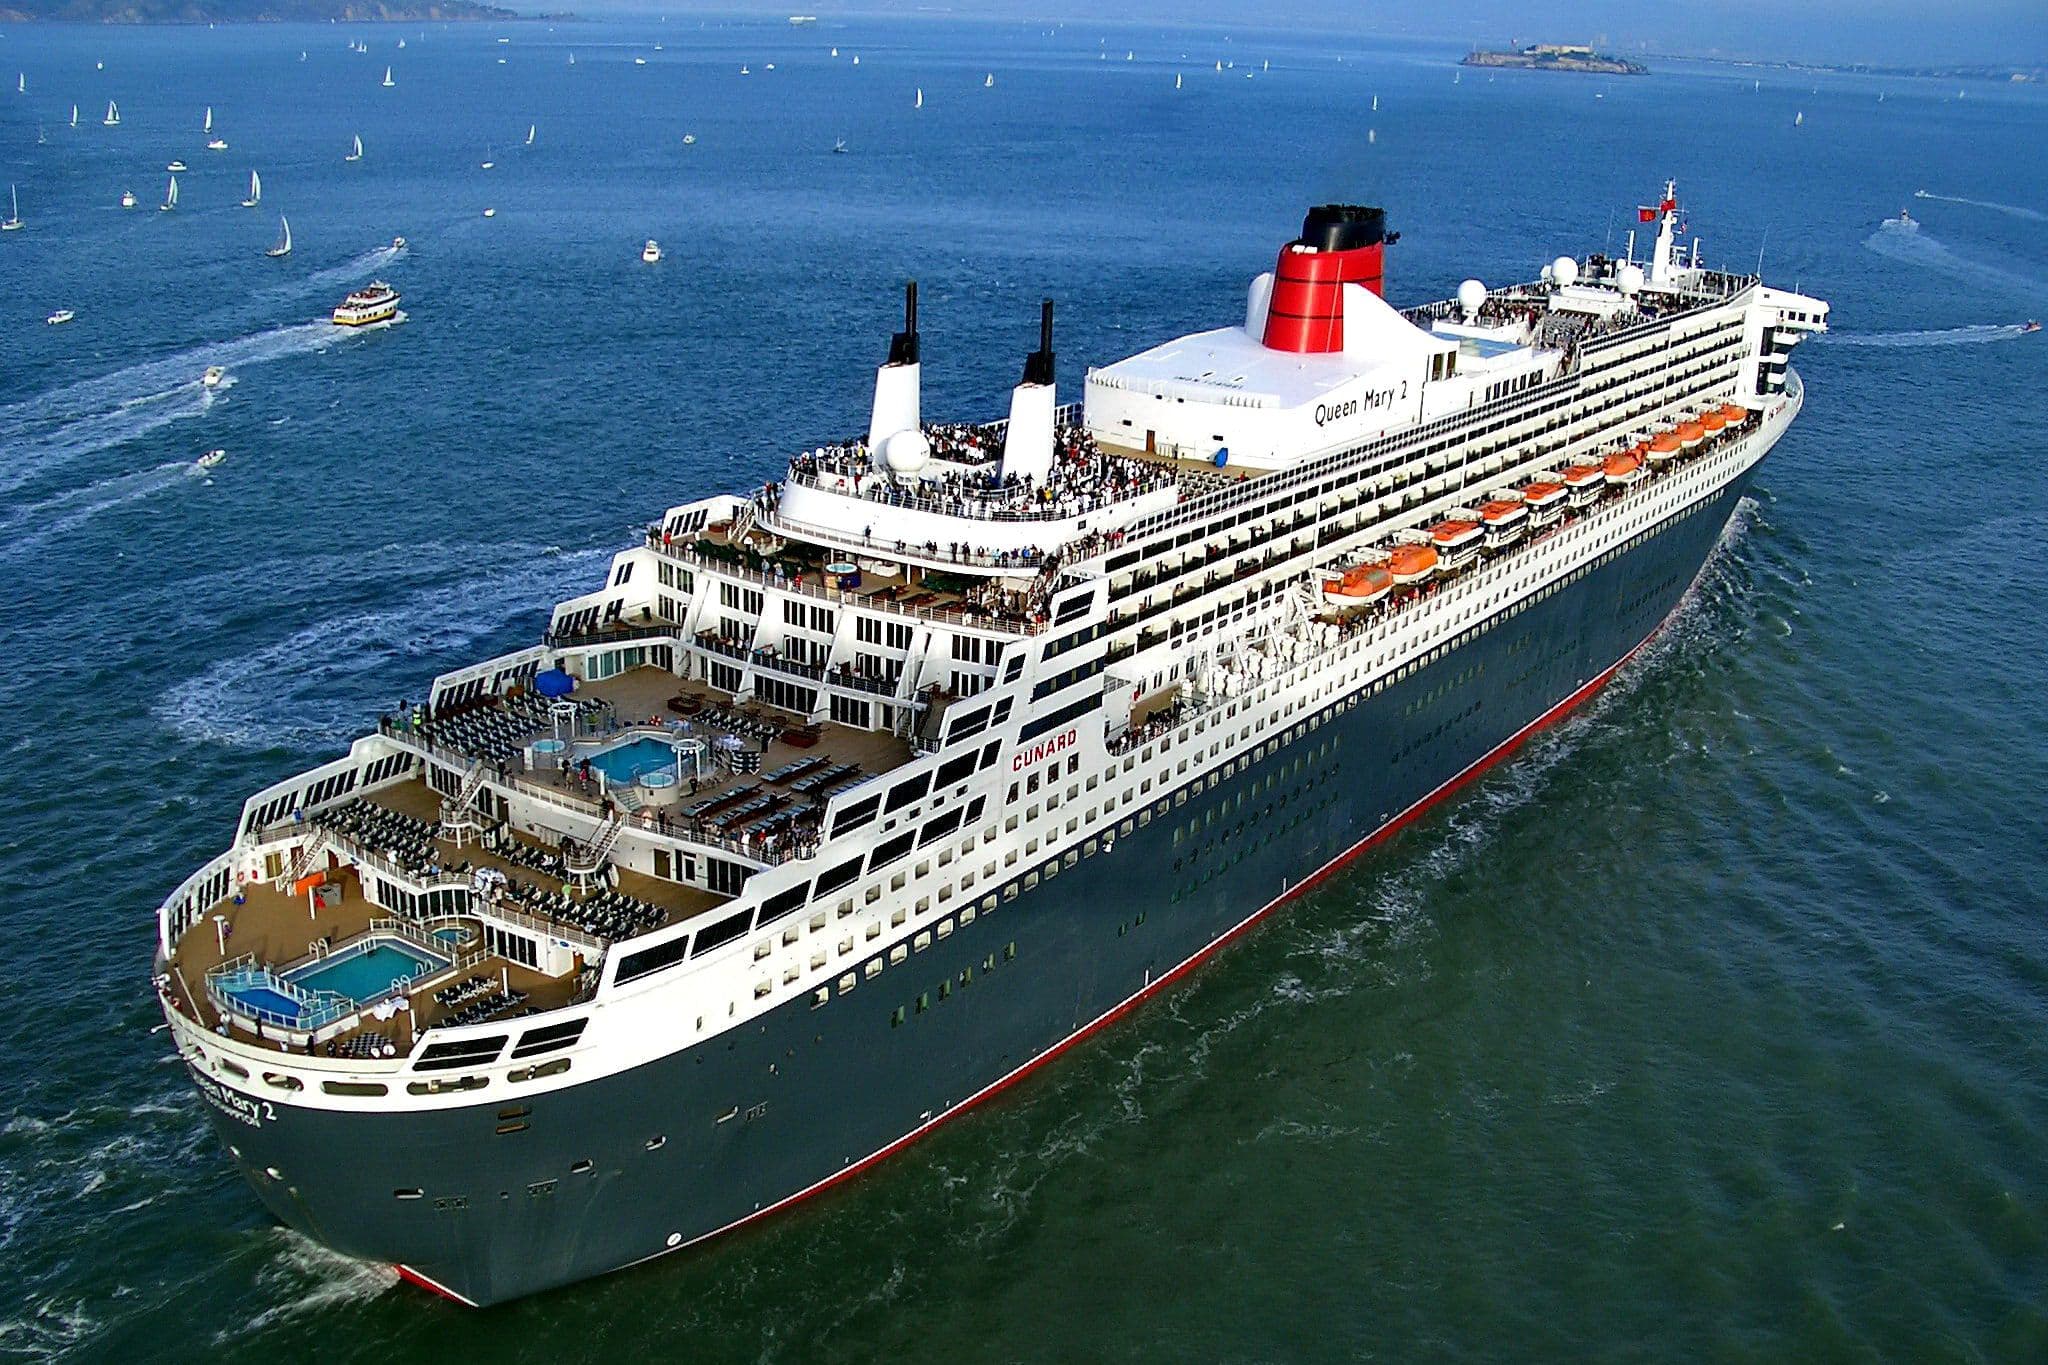 Sailing With the Queen Mary 2